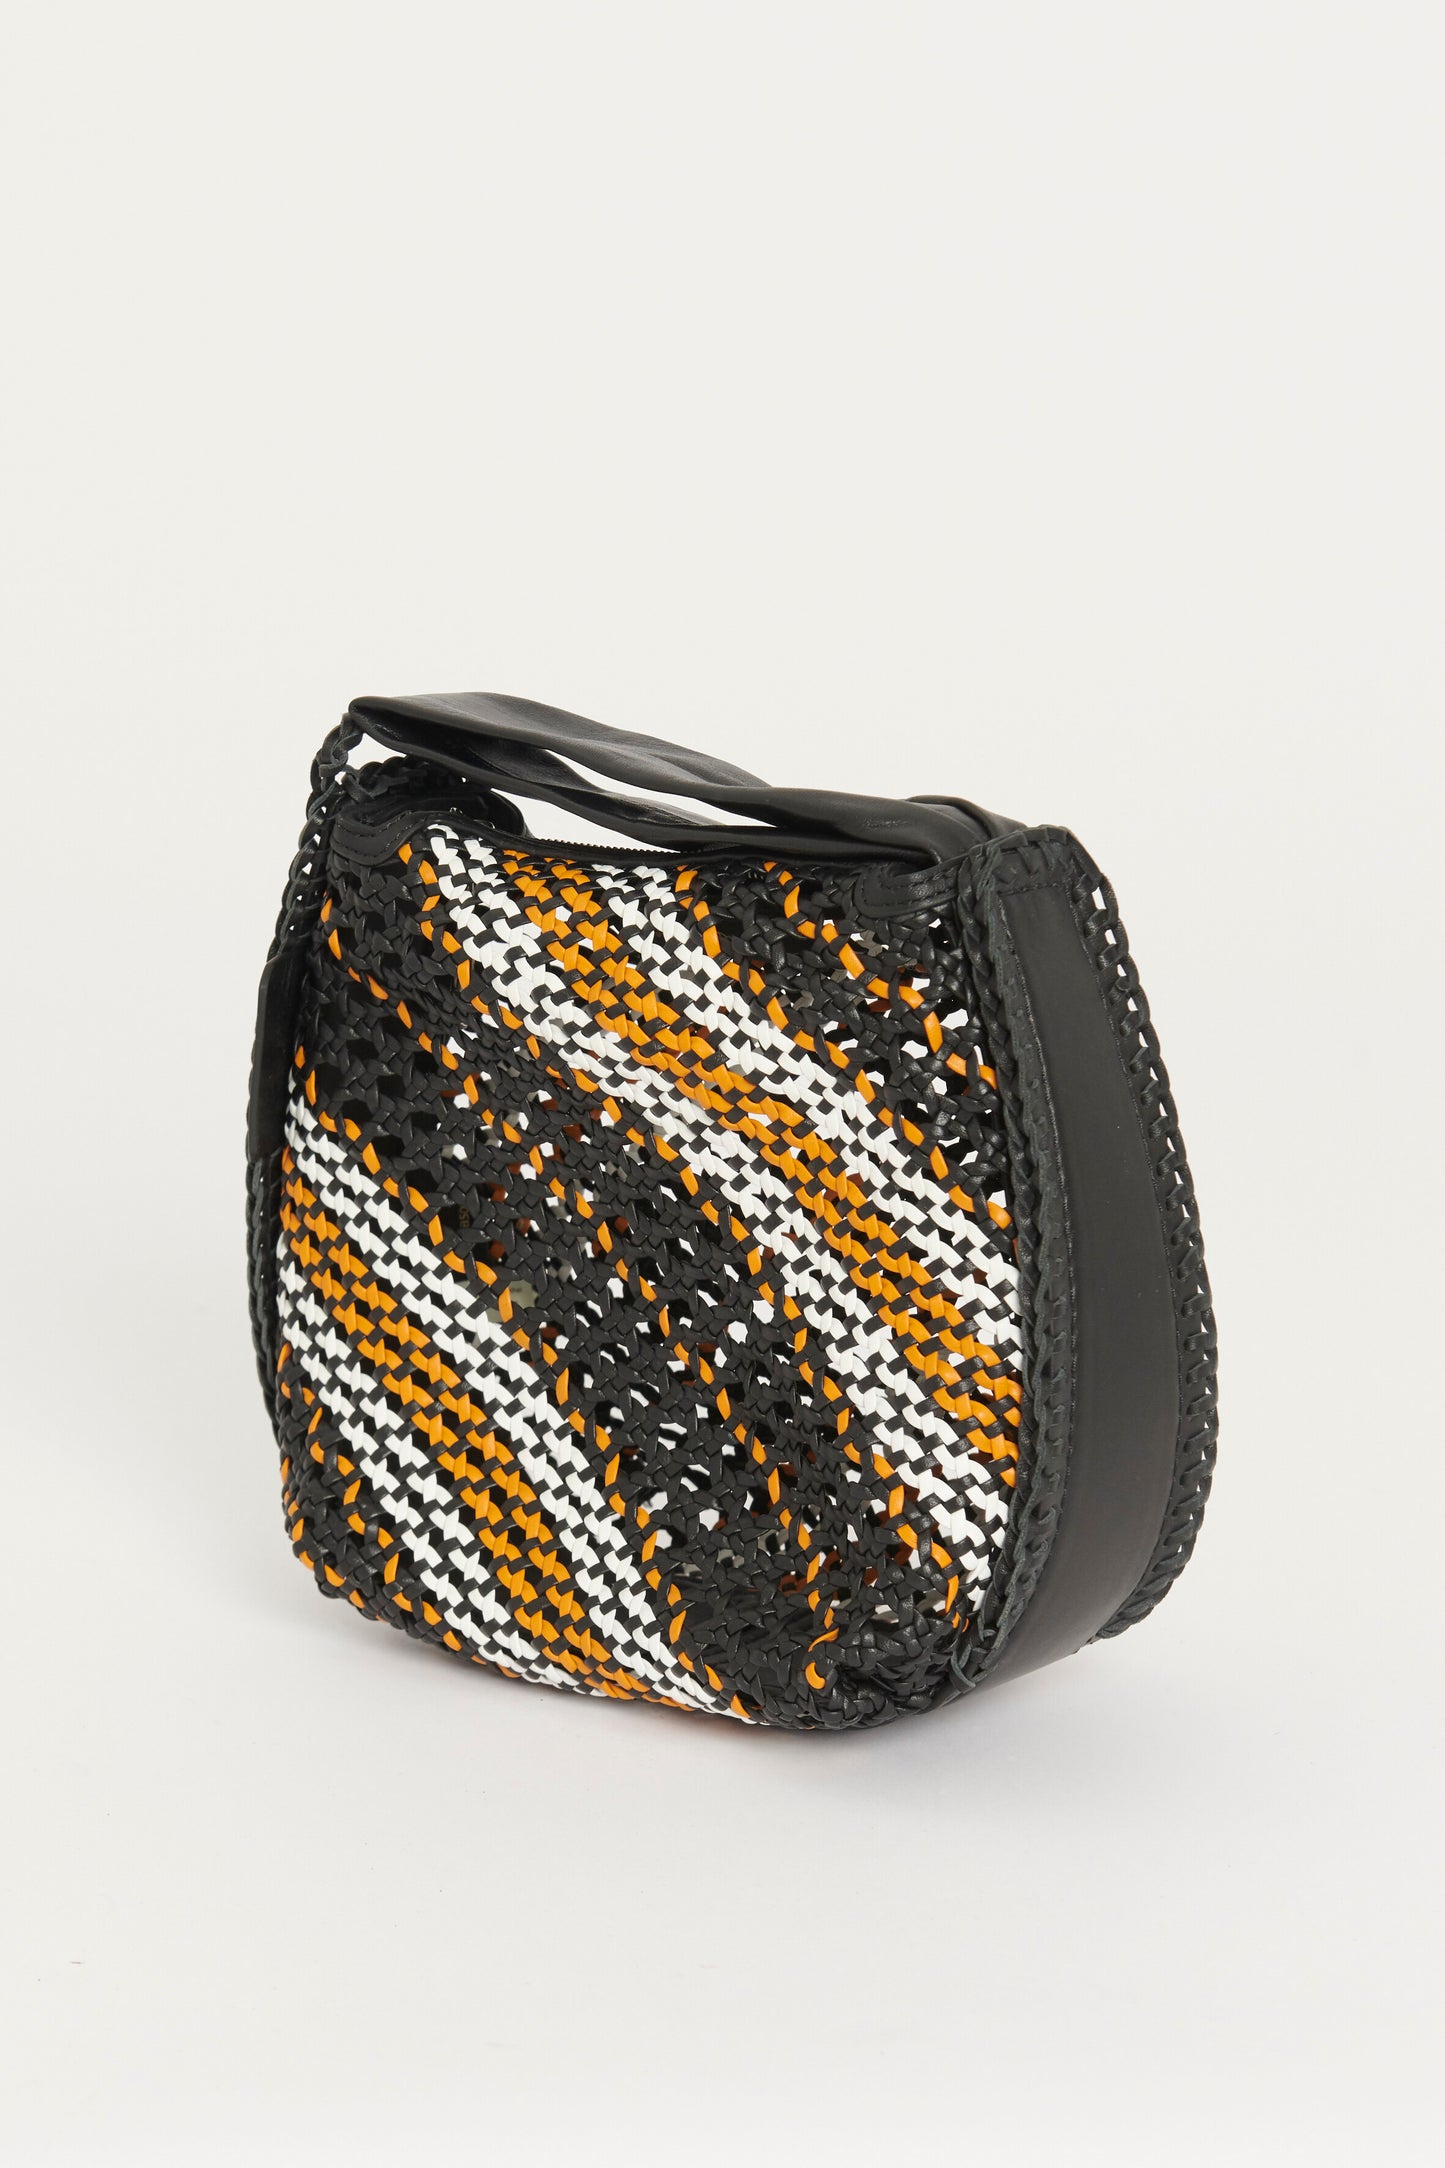 Black, Orange and White Woven Leather Preowned Bag with Wrist Strap